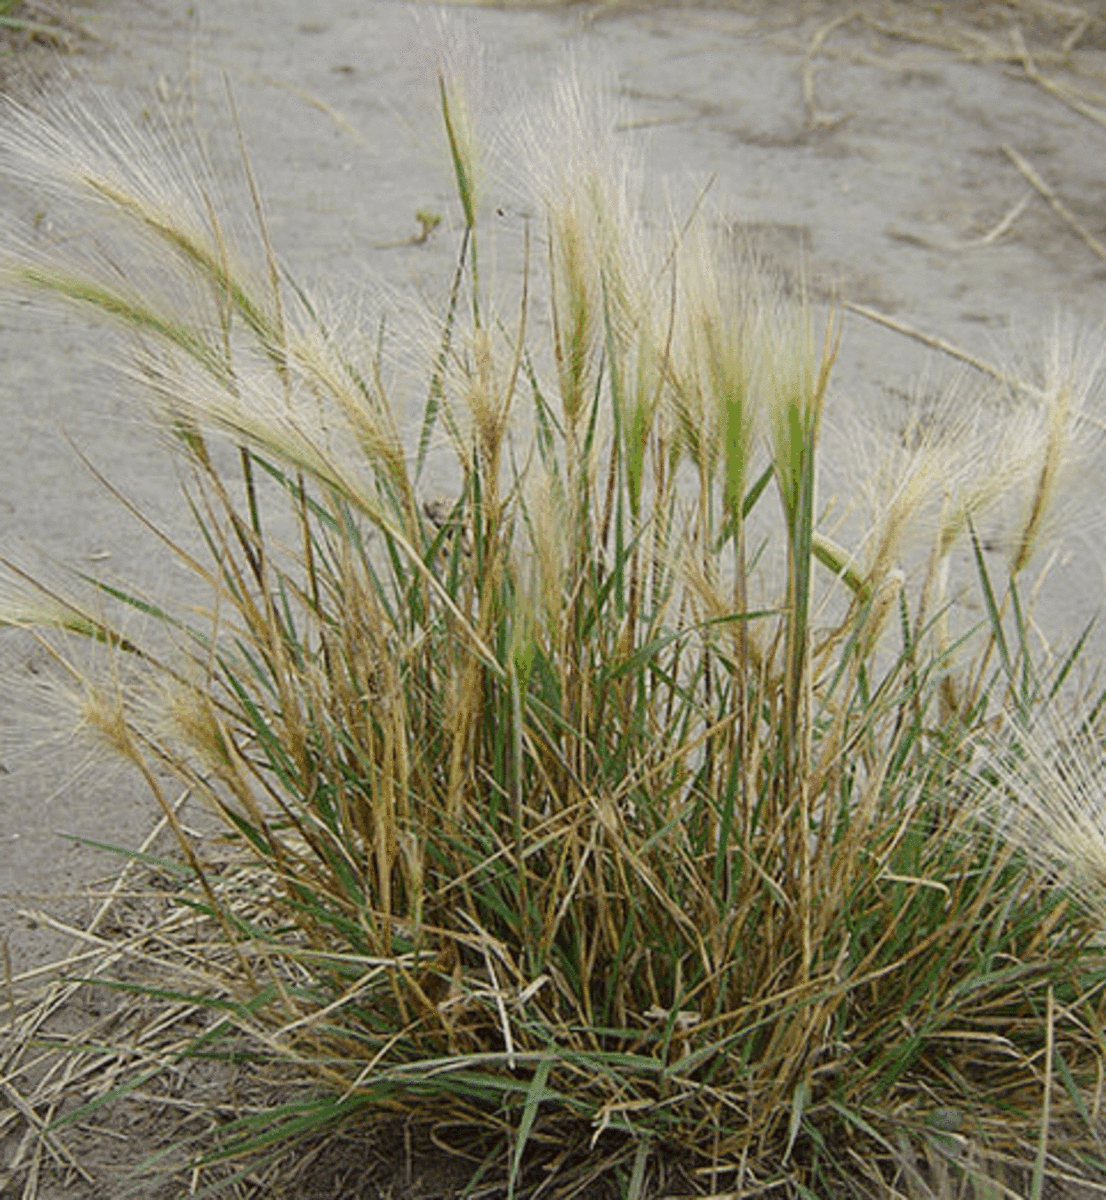 Foxtails pose a serious danger to dogs